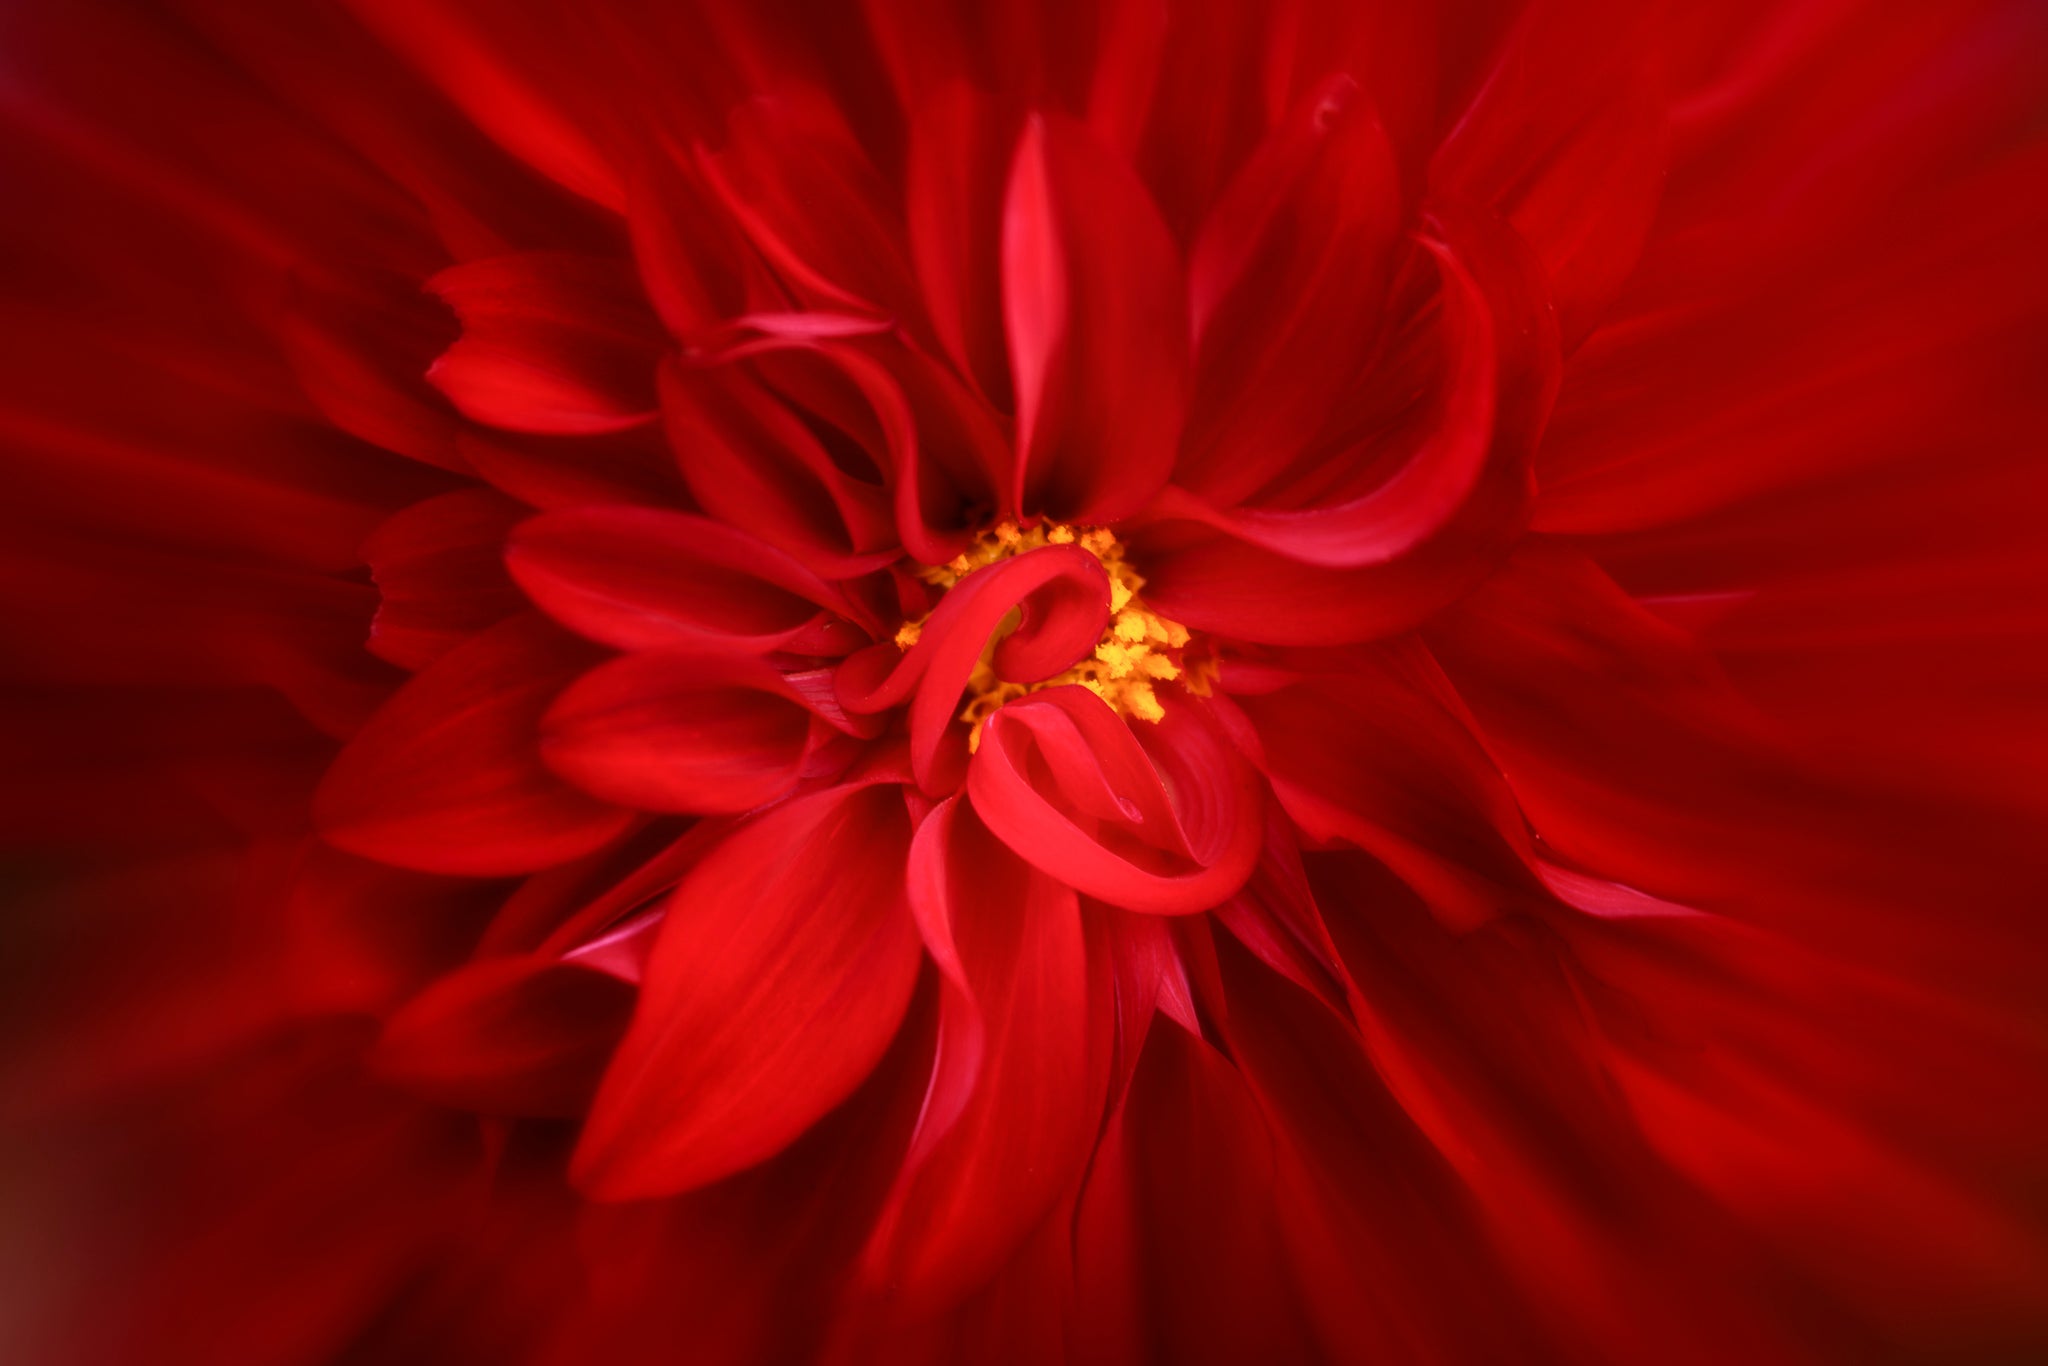 A vivid red dahlia flower with a large ruffled bloom and thin stamens protruding from its center. Its petals are layered in concentric circles, each one a slightly different hue of red. The texture of the petals is smooth and velvety, reflecting light from different angles. A photograph is by Cameron Dreaux from Dreaux Fine Art. 